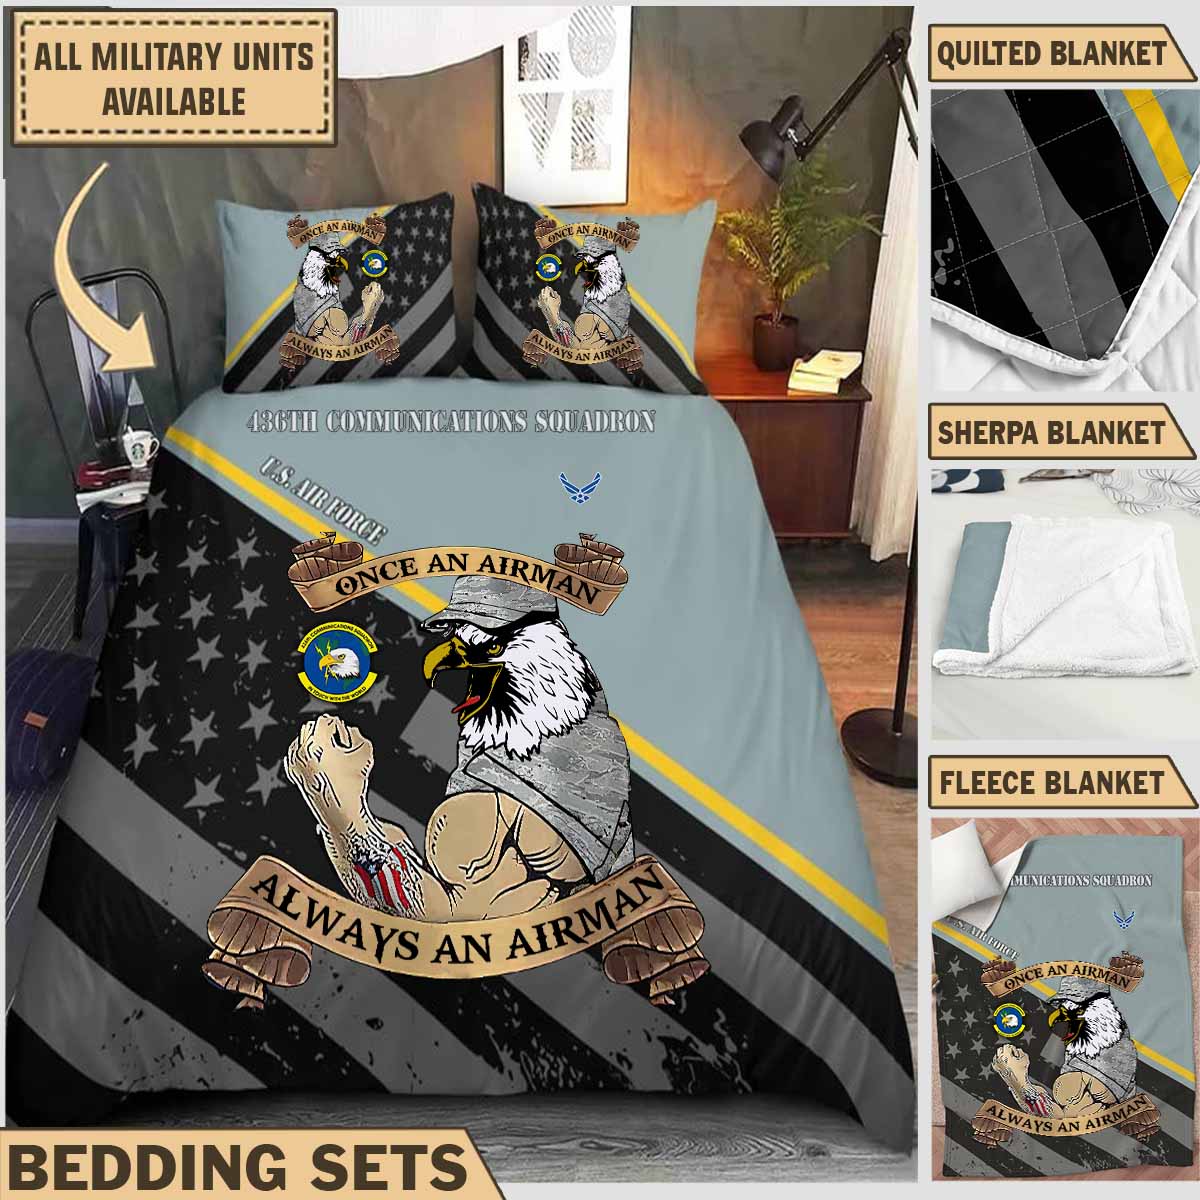 436th cs communications squadronbedding collection 477ud